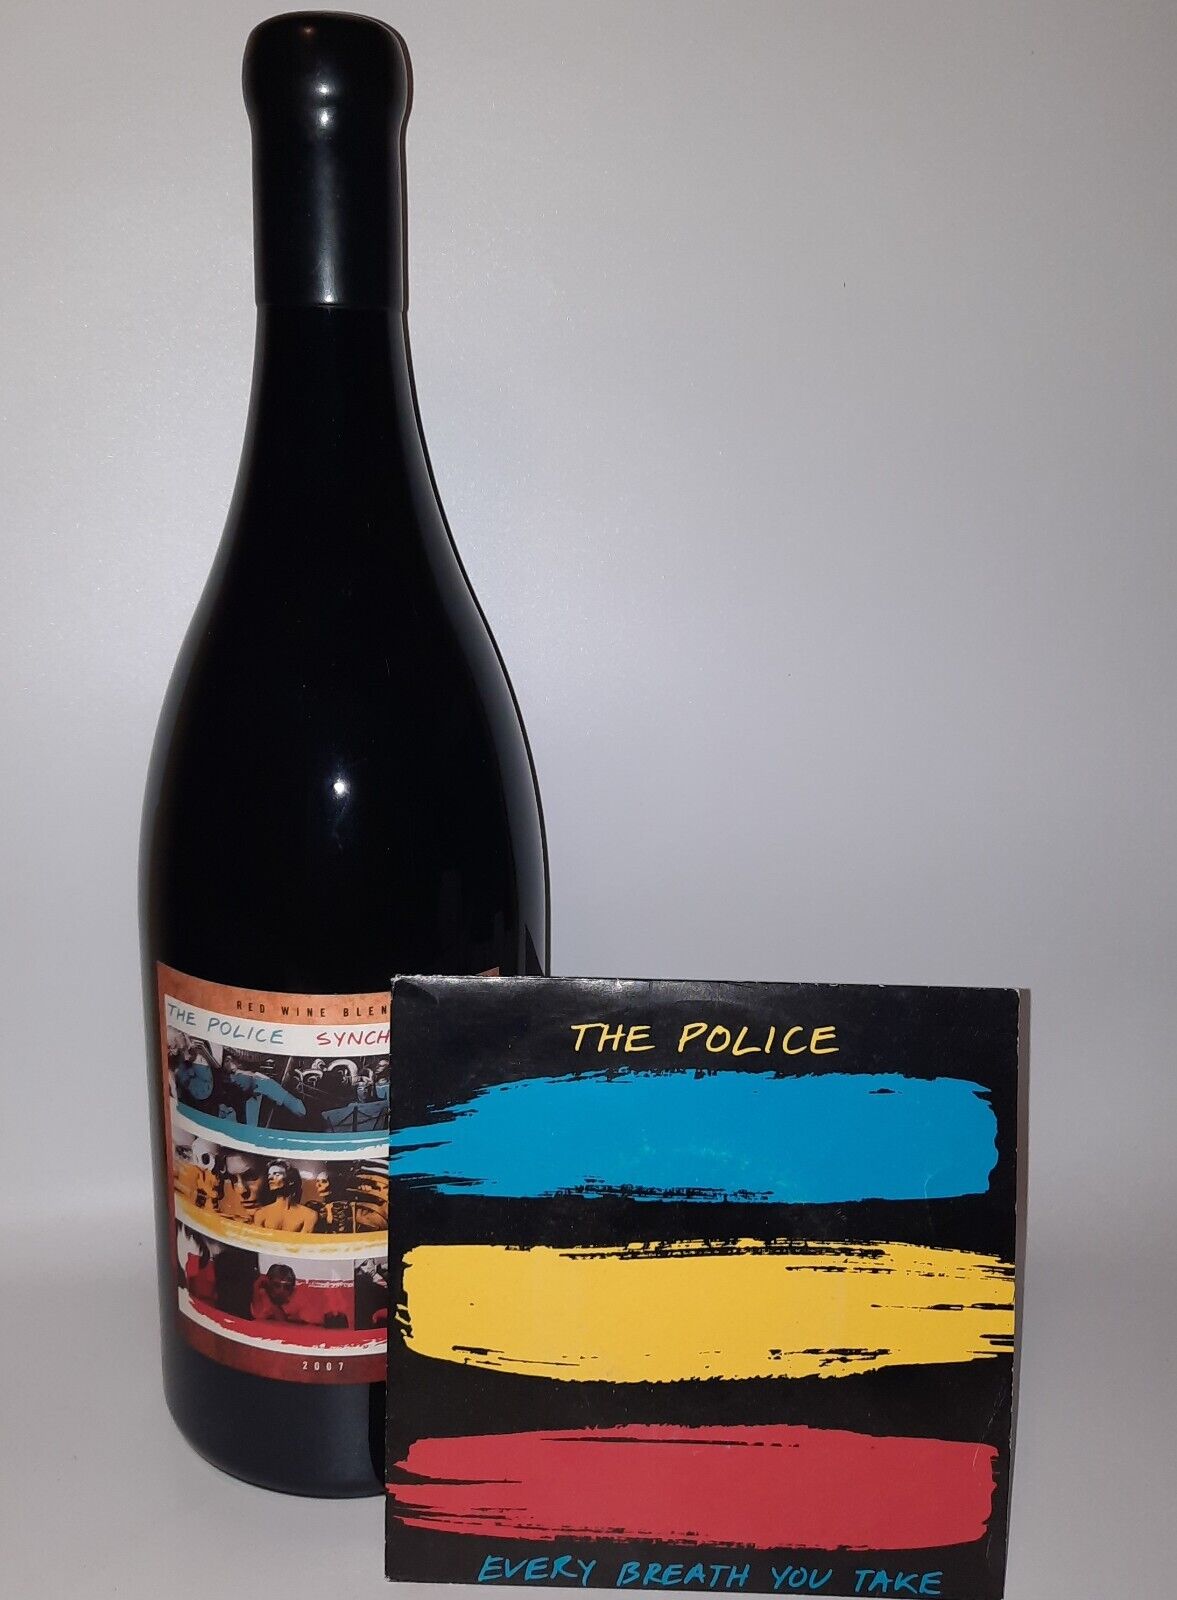 THE POLICE SYNCHRONICITY WINES THAT ROCK EMPTY WINE BOTTLE & 45RPM VINYL RECORD